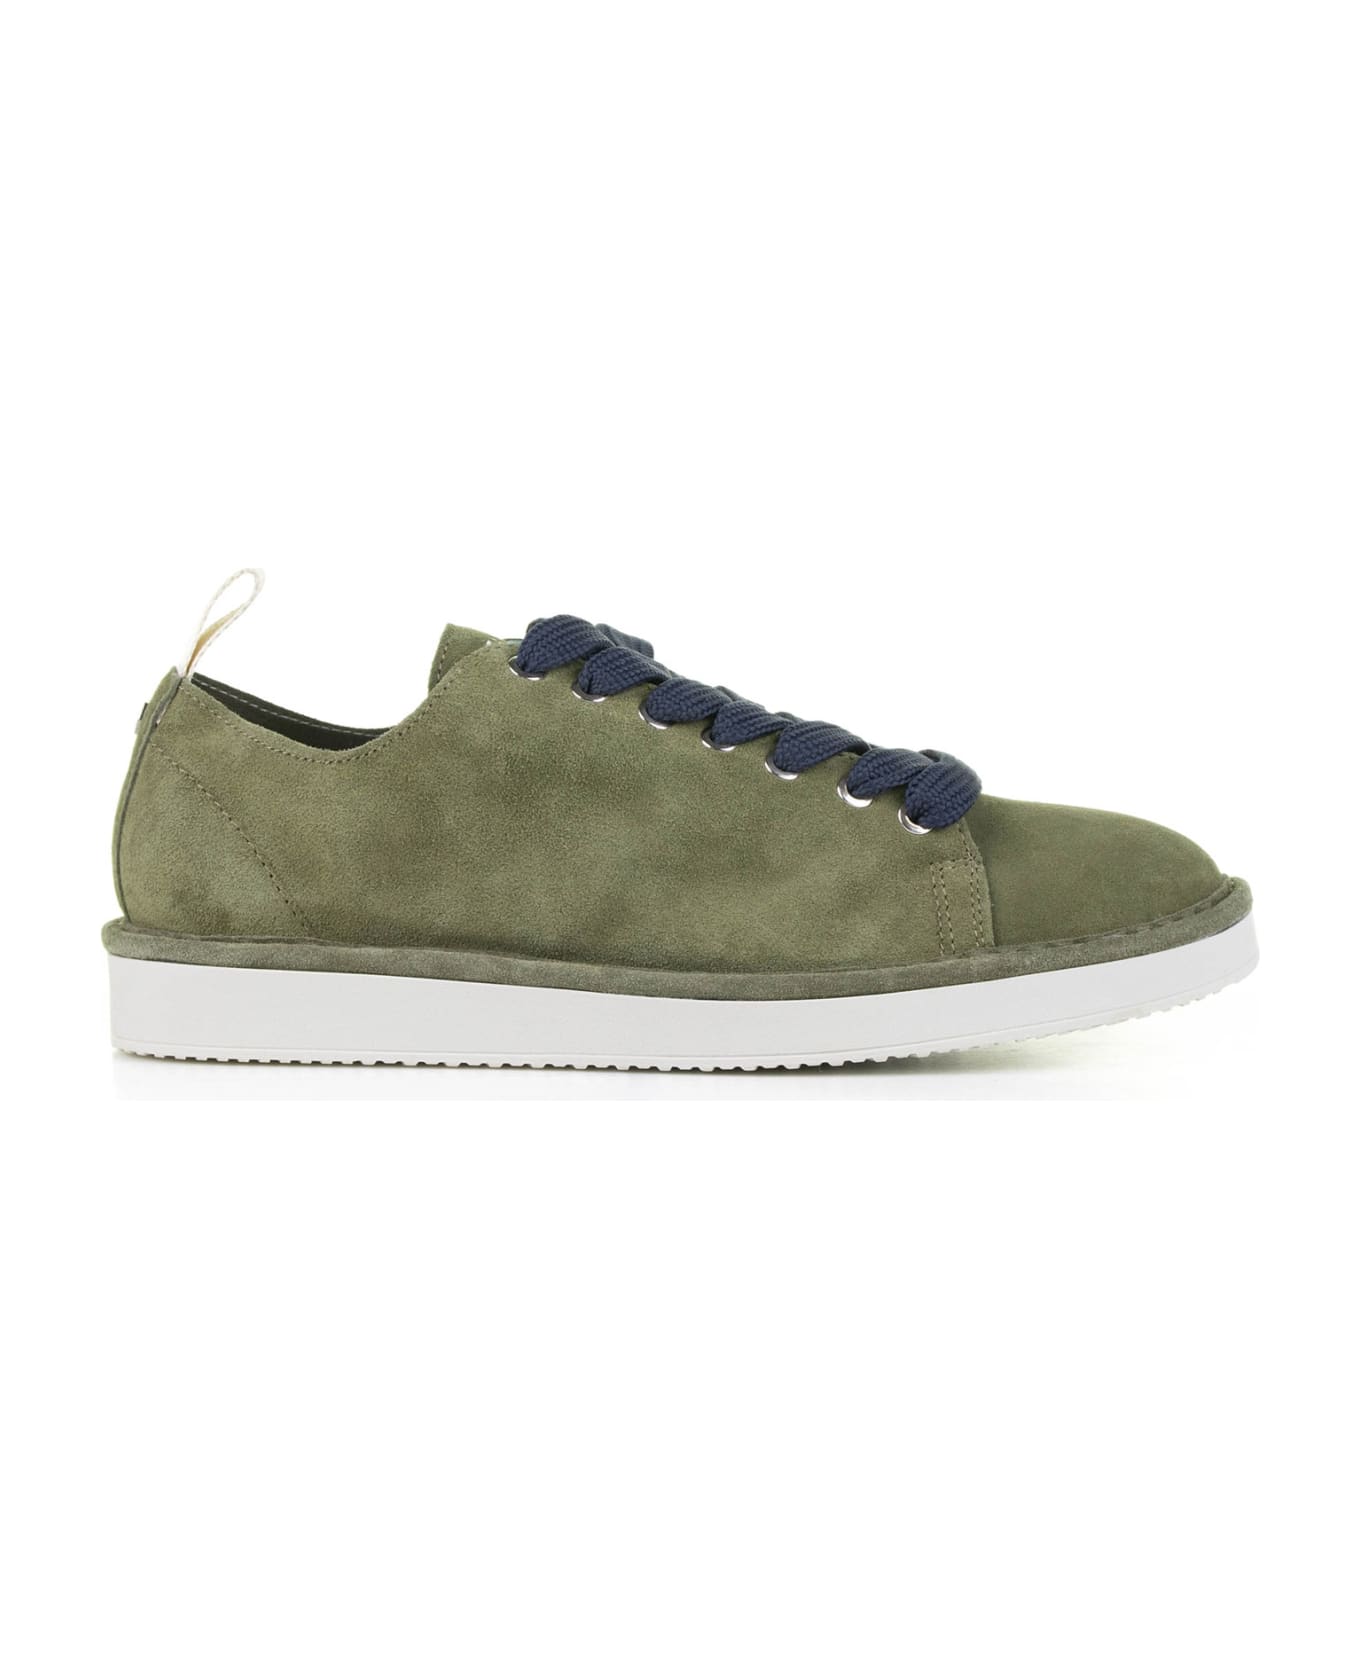 Panchic Sneaker In Military Green Suede - FOREST-NIGHT COBALT スニーカー